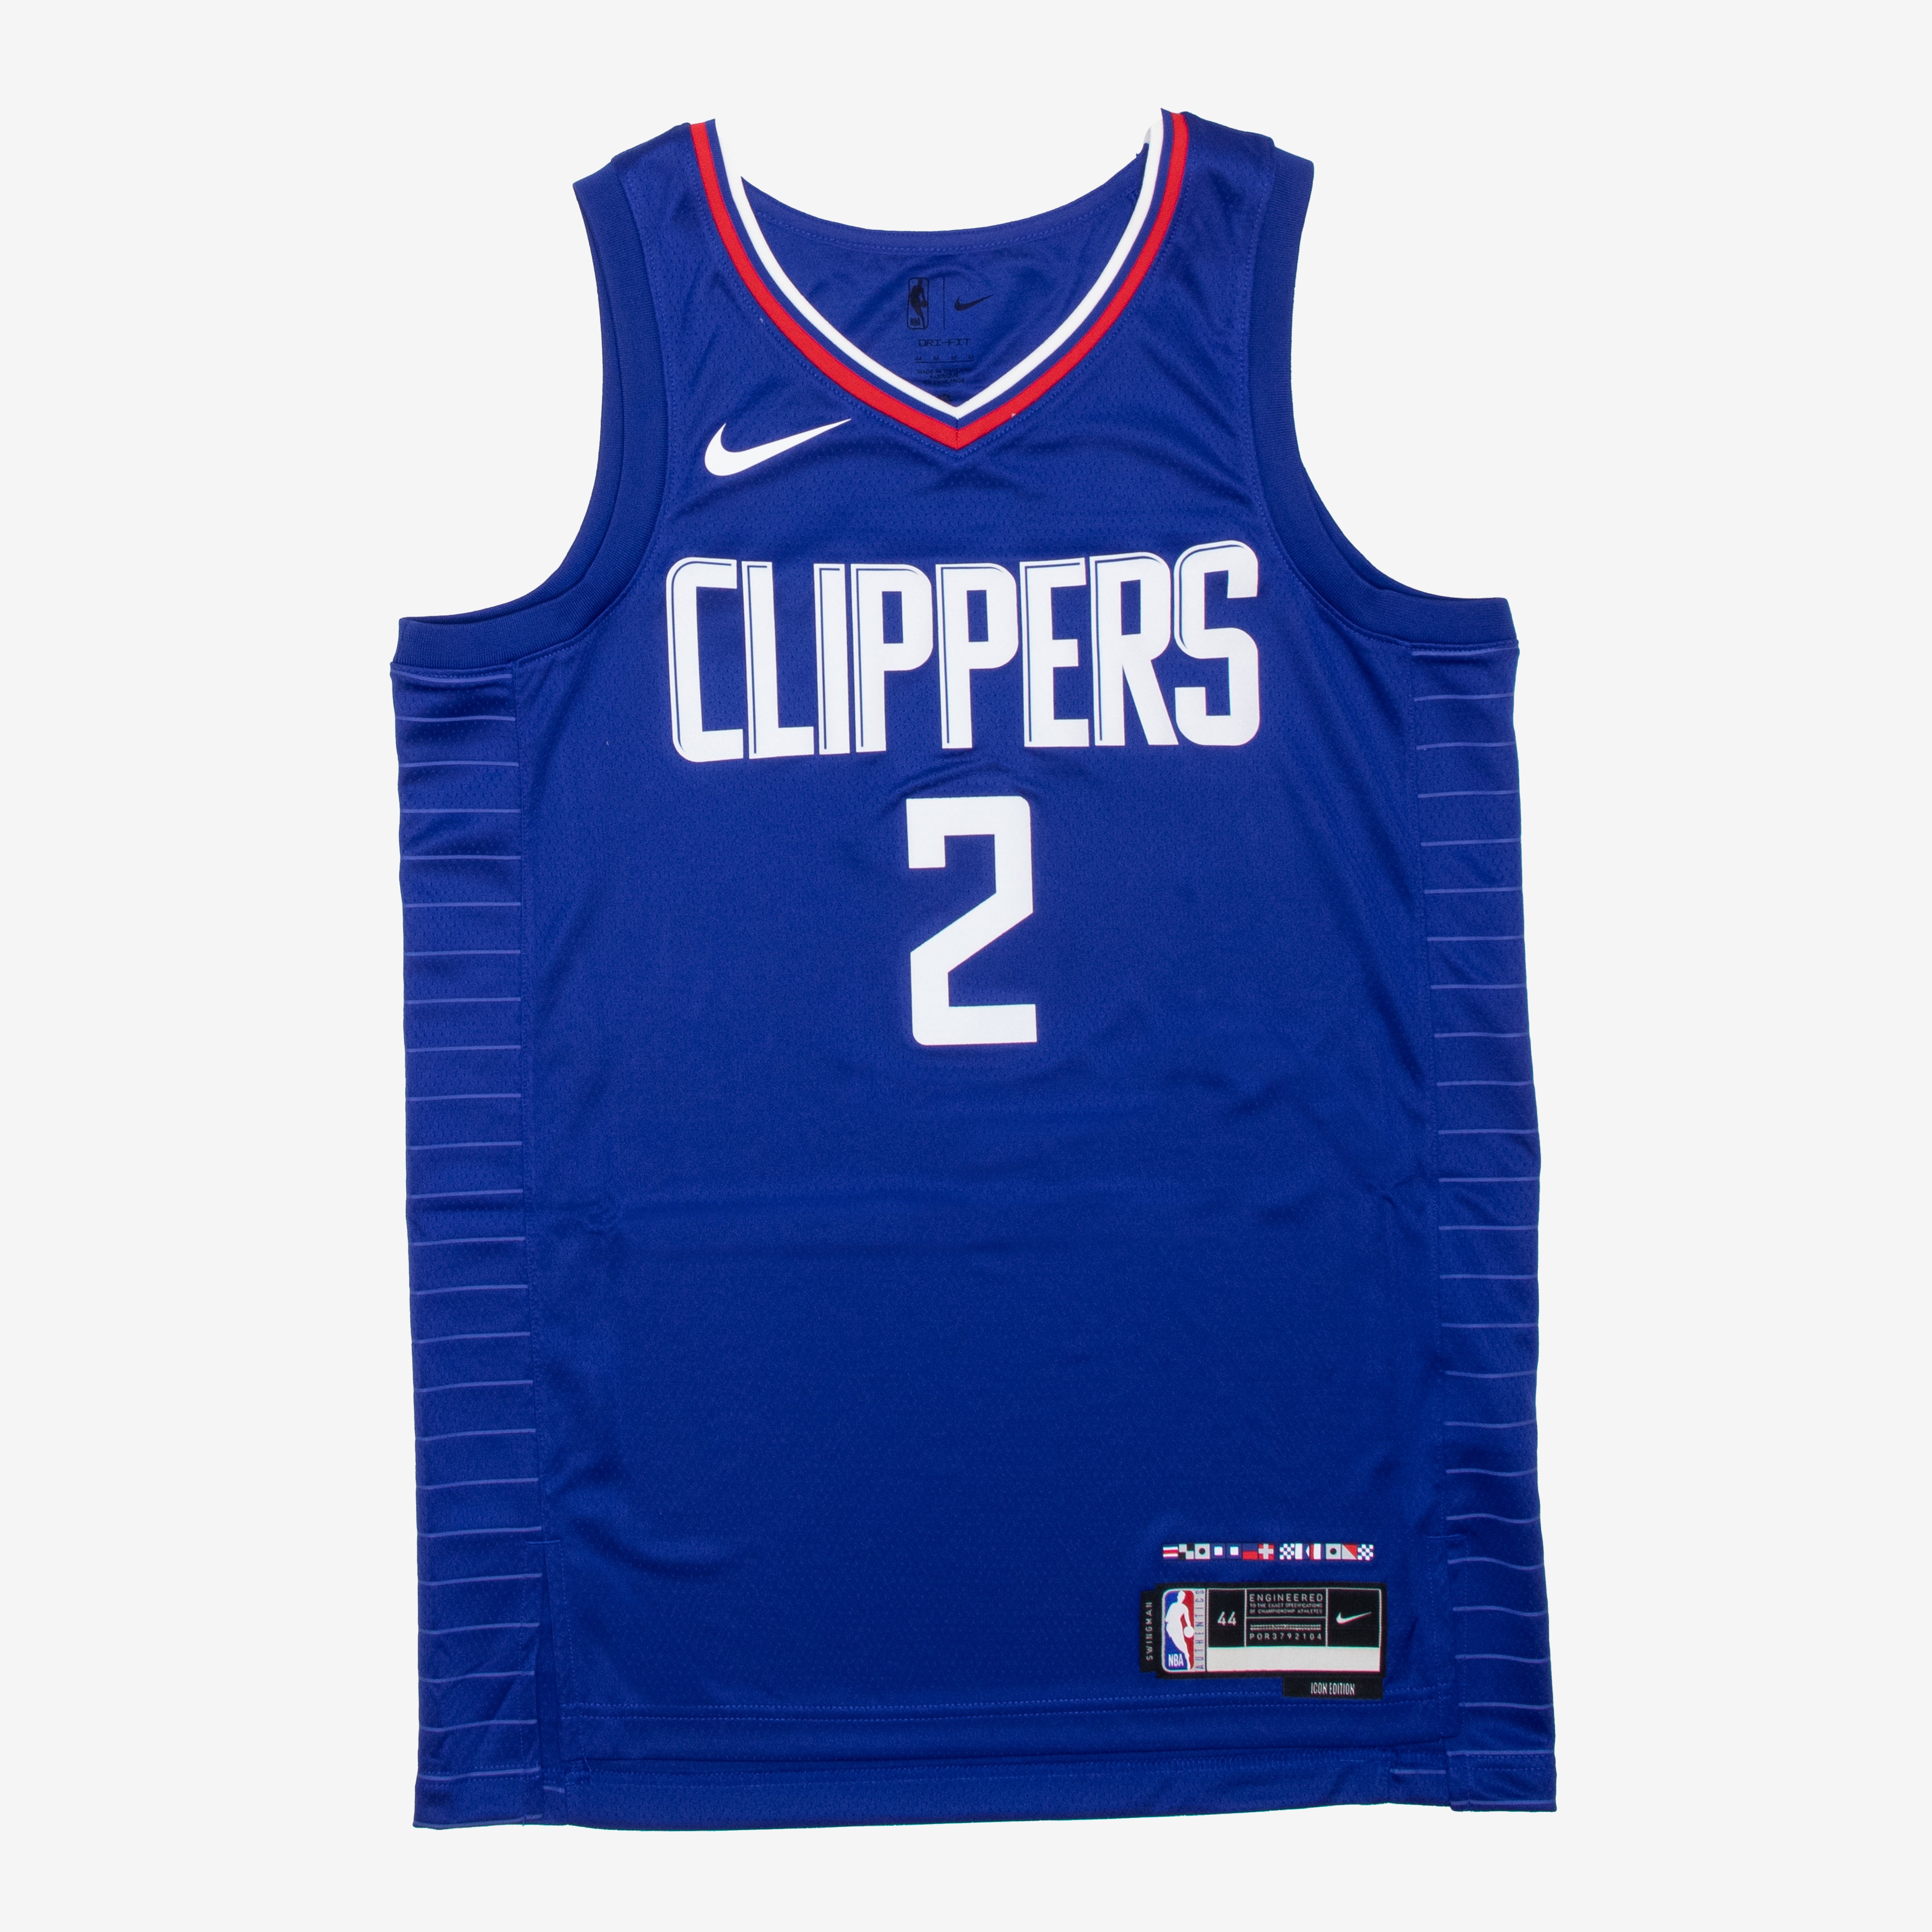 Los Angeles Clippers Alternate Uniform - National Basketball